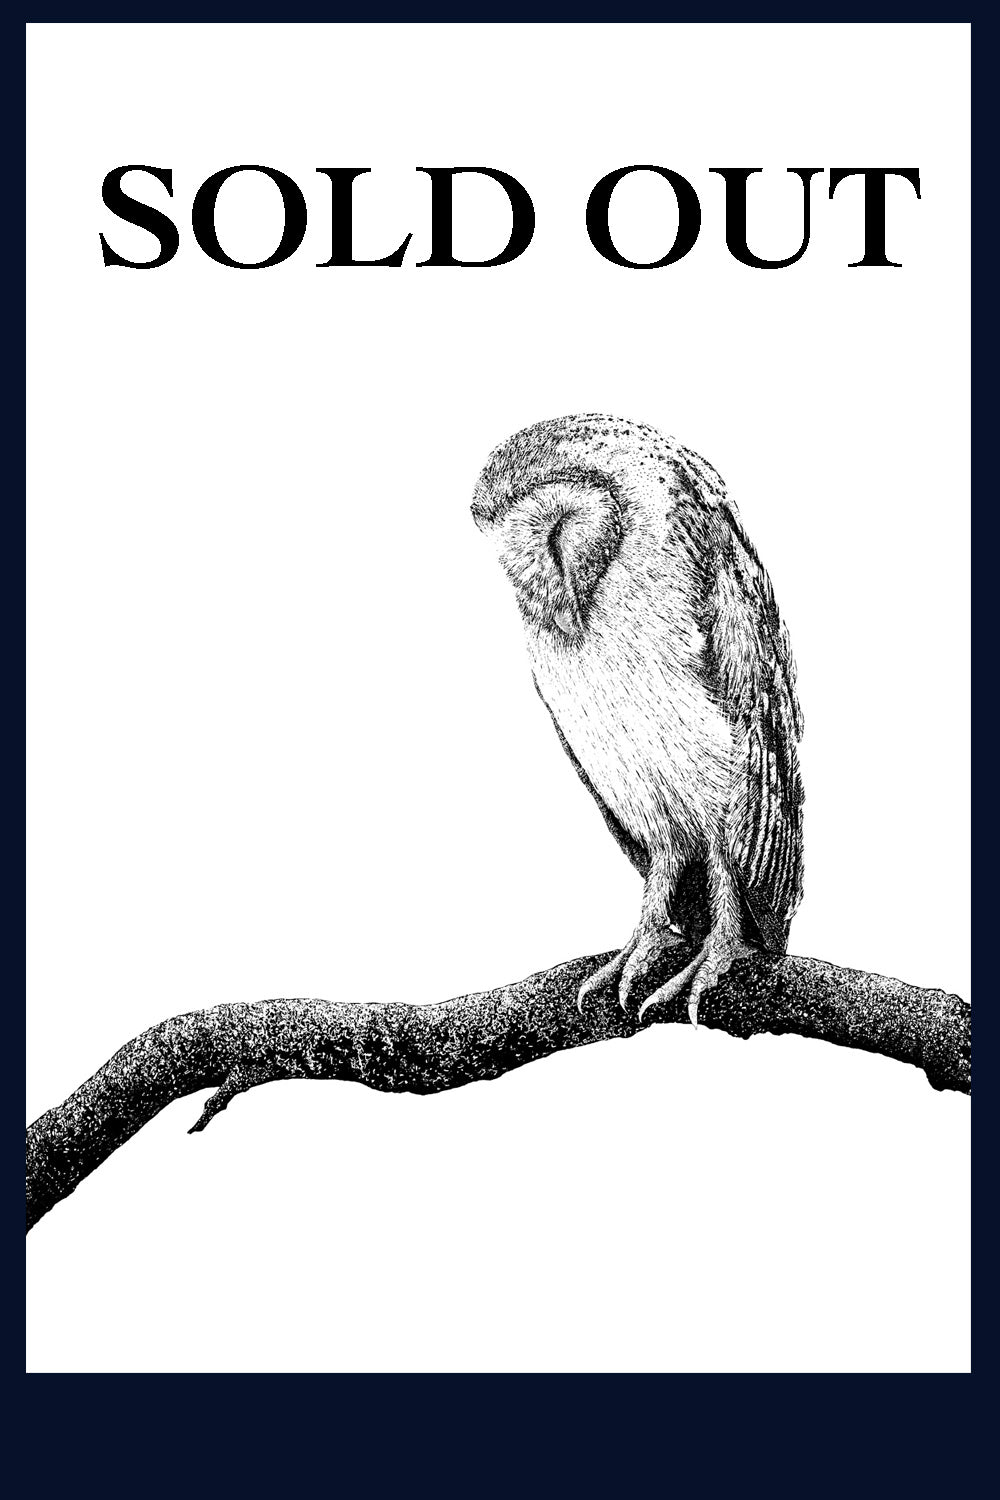 SOLD OUT - Roost Limited Edition of 50 Fine Art Print